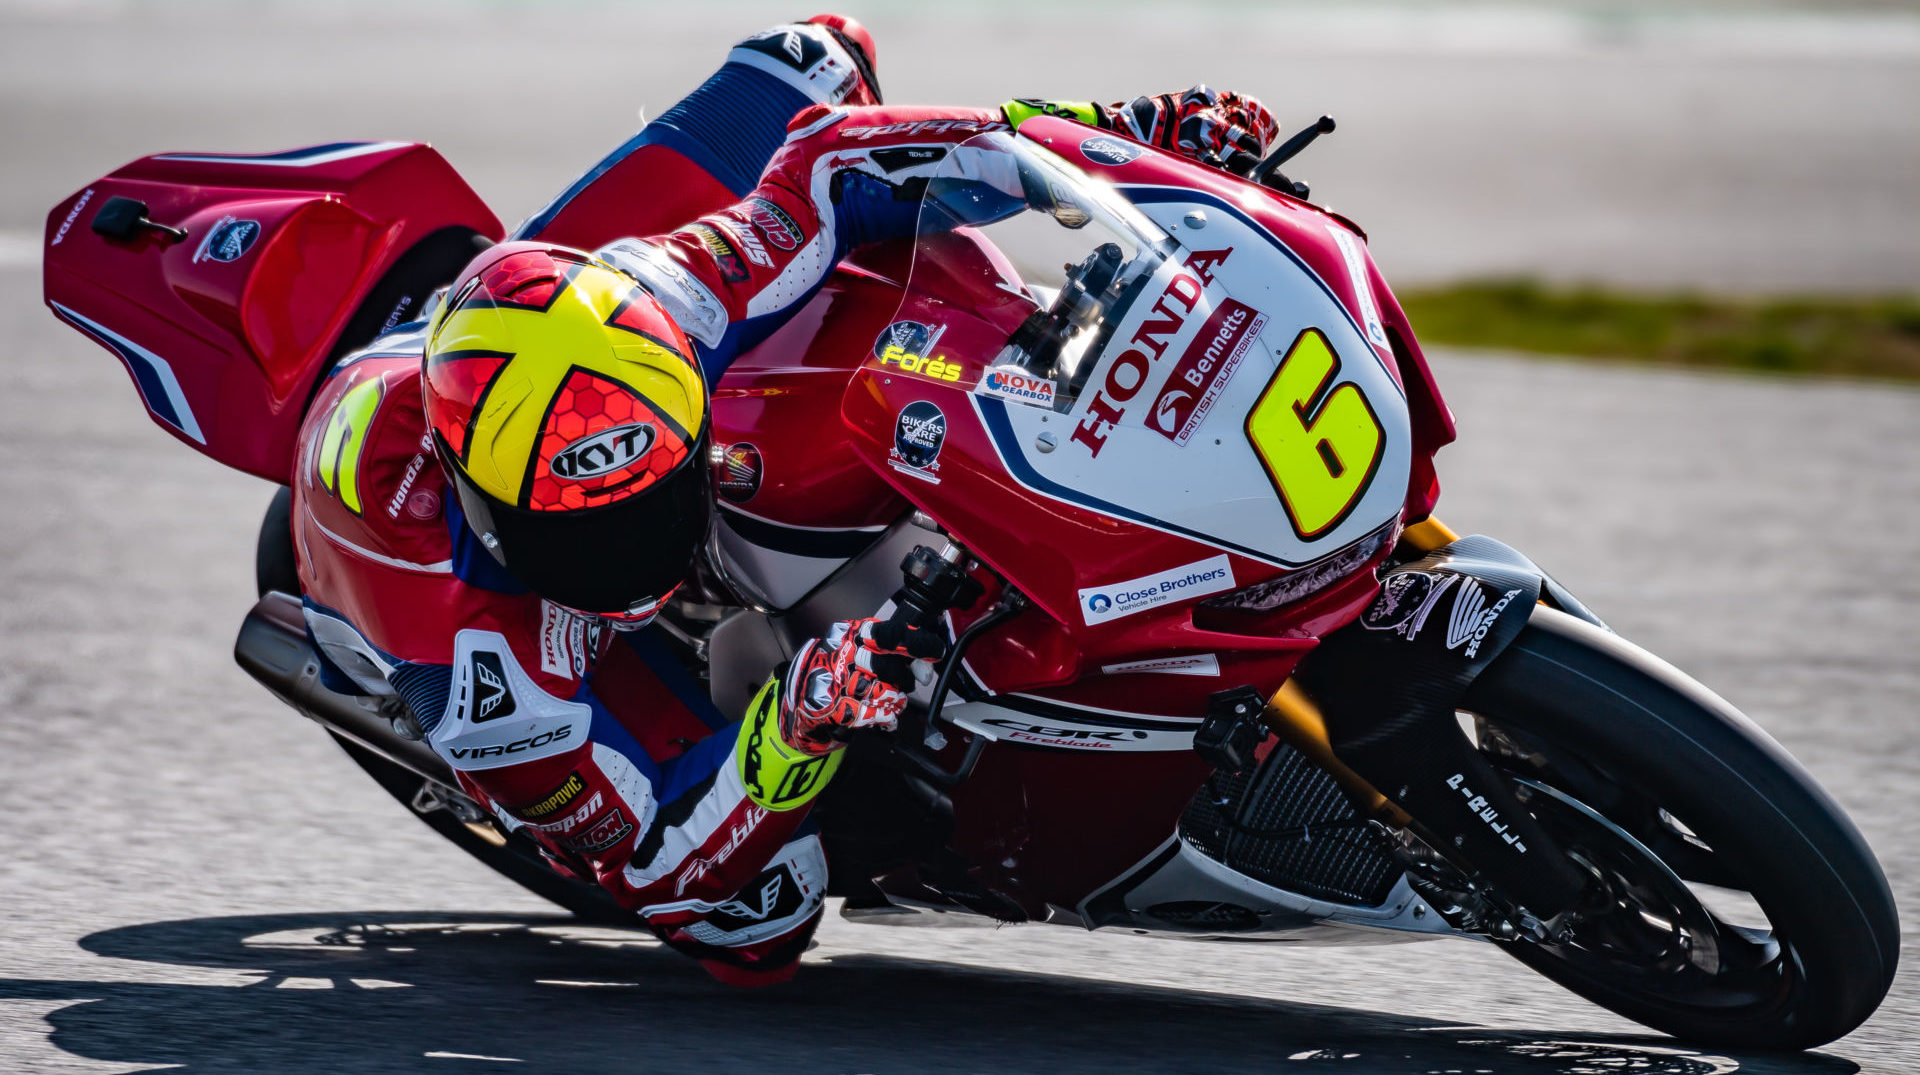 Xavi Fores (6) rode for the Honda UK factory team in the 2019 British Superbike Championship. Photo by Barry Clay.